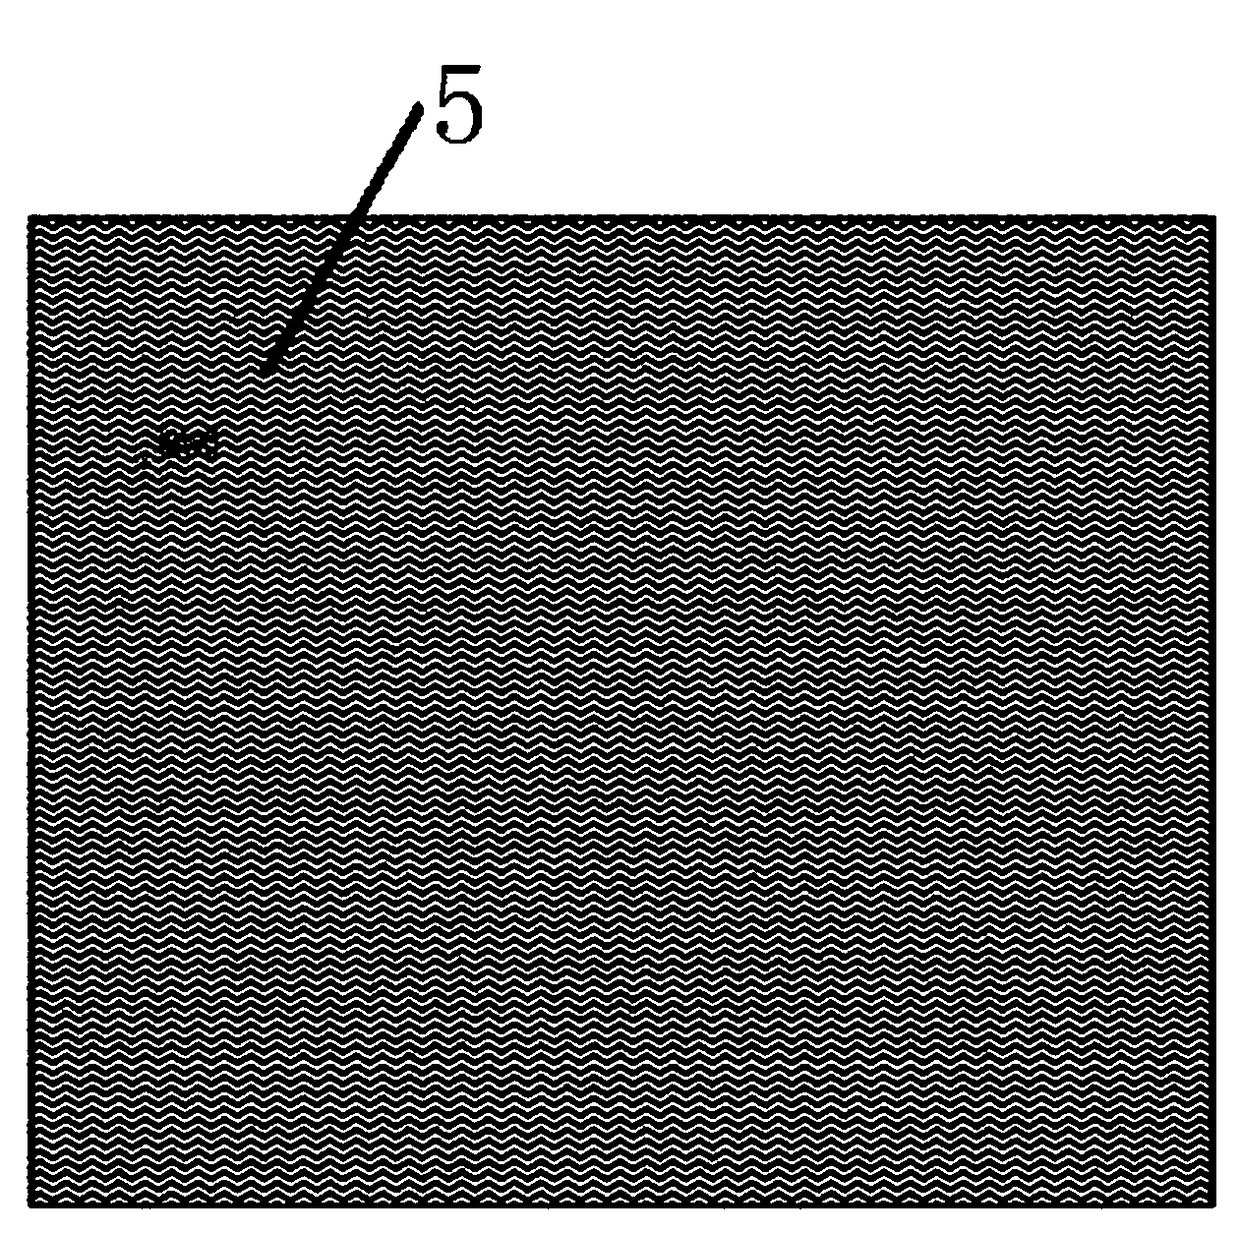 Two-way refraction latent image anti-counterfeiting document with pearlescent effect and production method